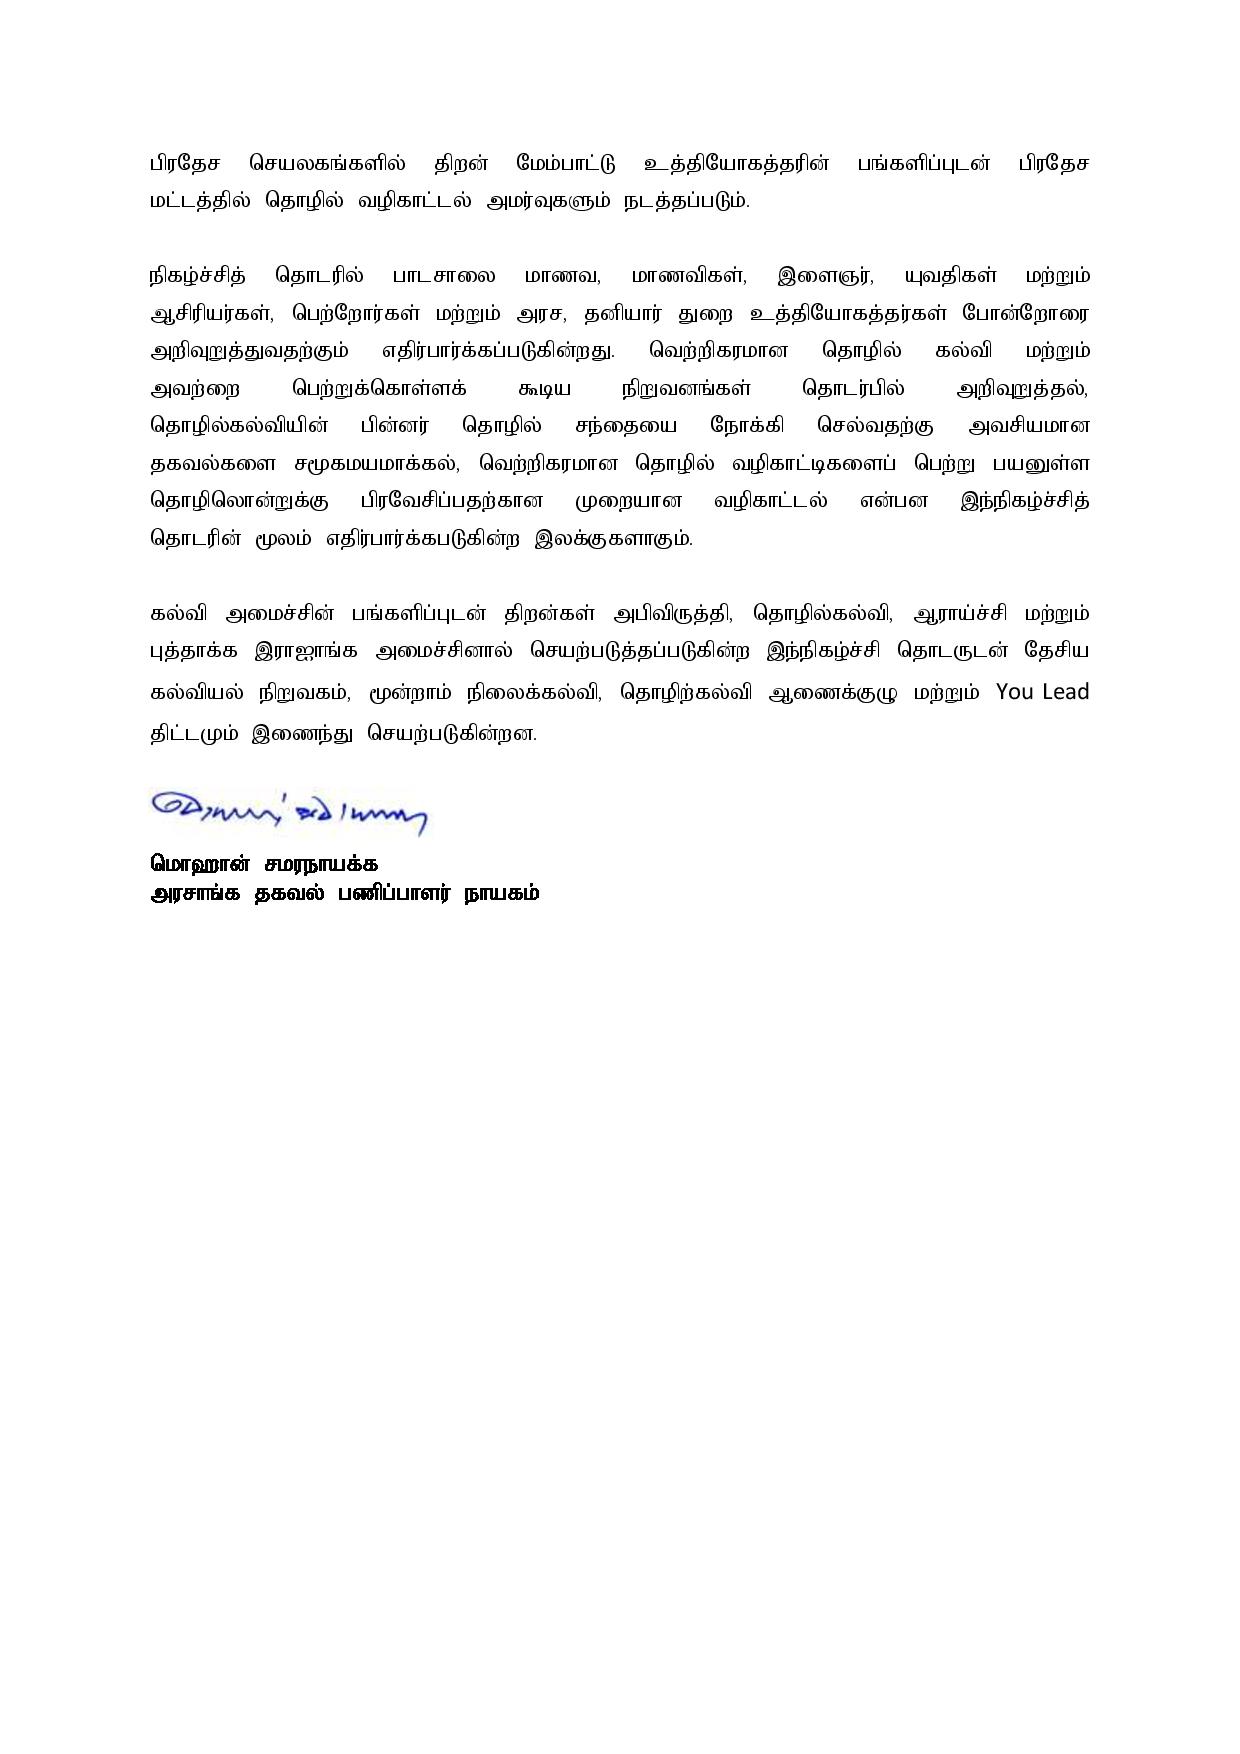 Press Release 986Tamil page 002